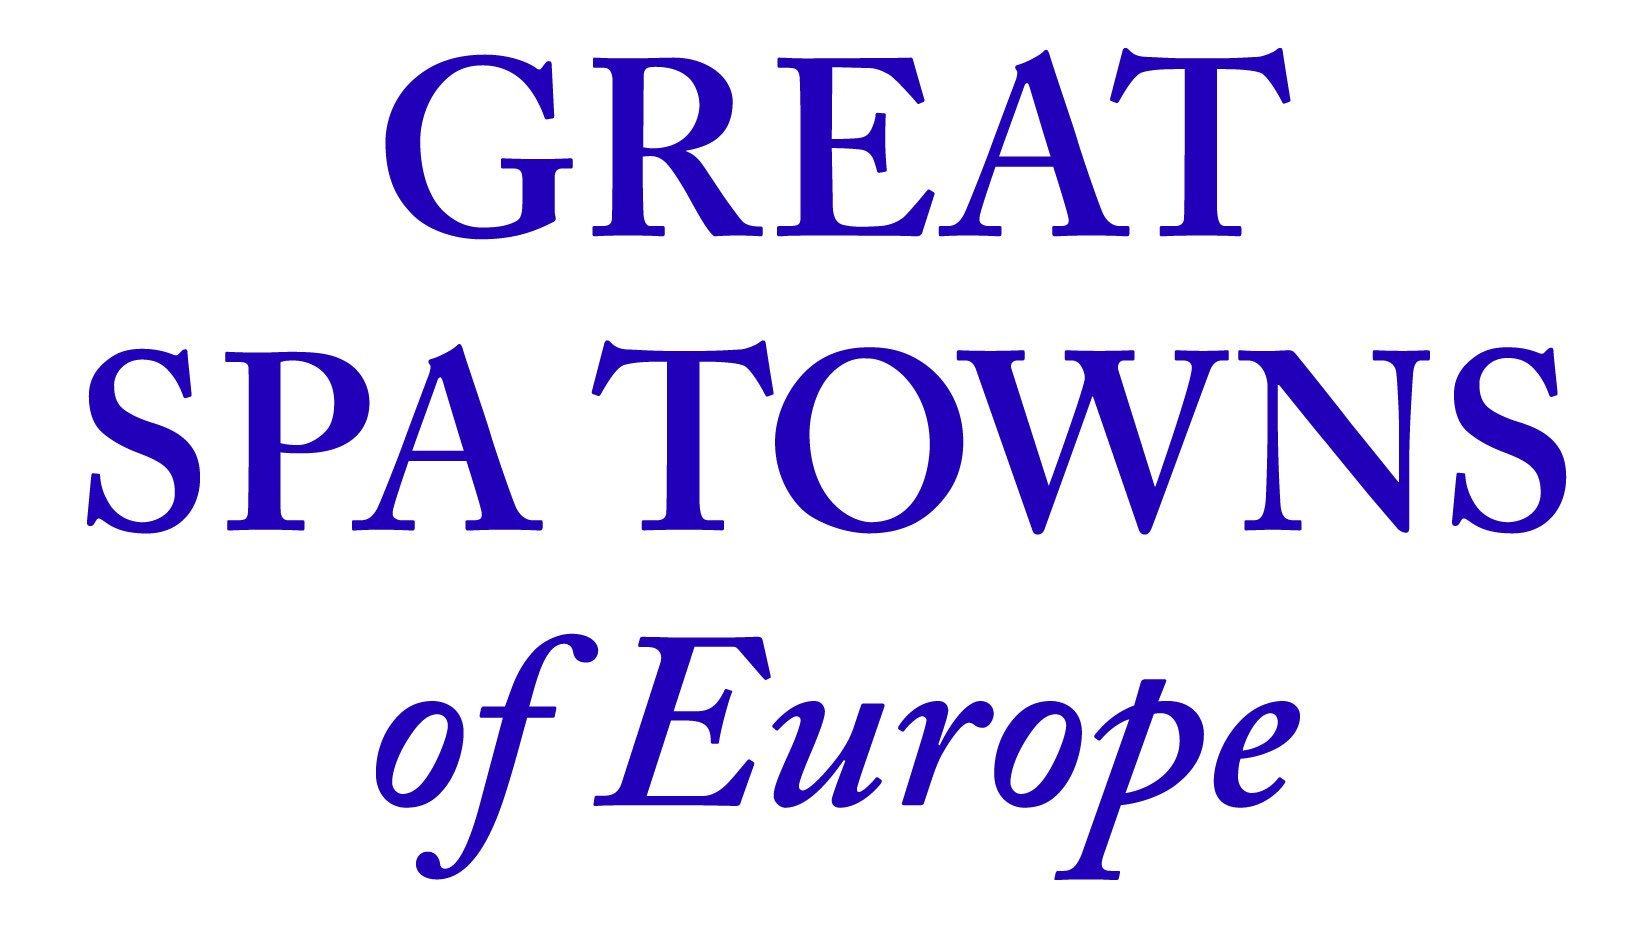 Great Spa Towns of Europe